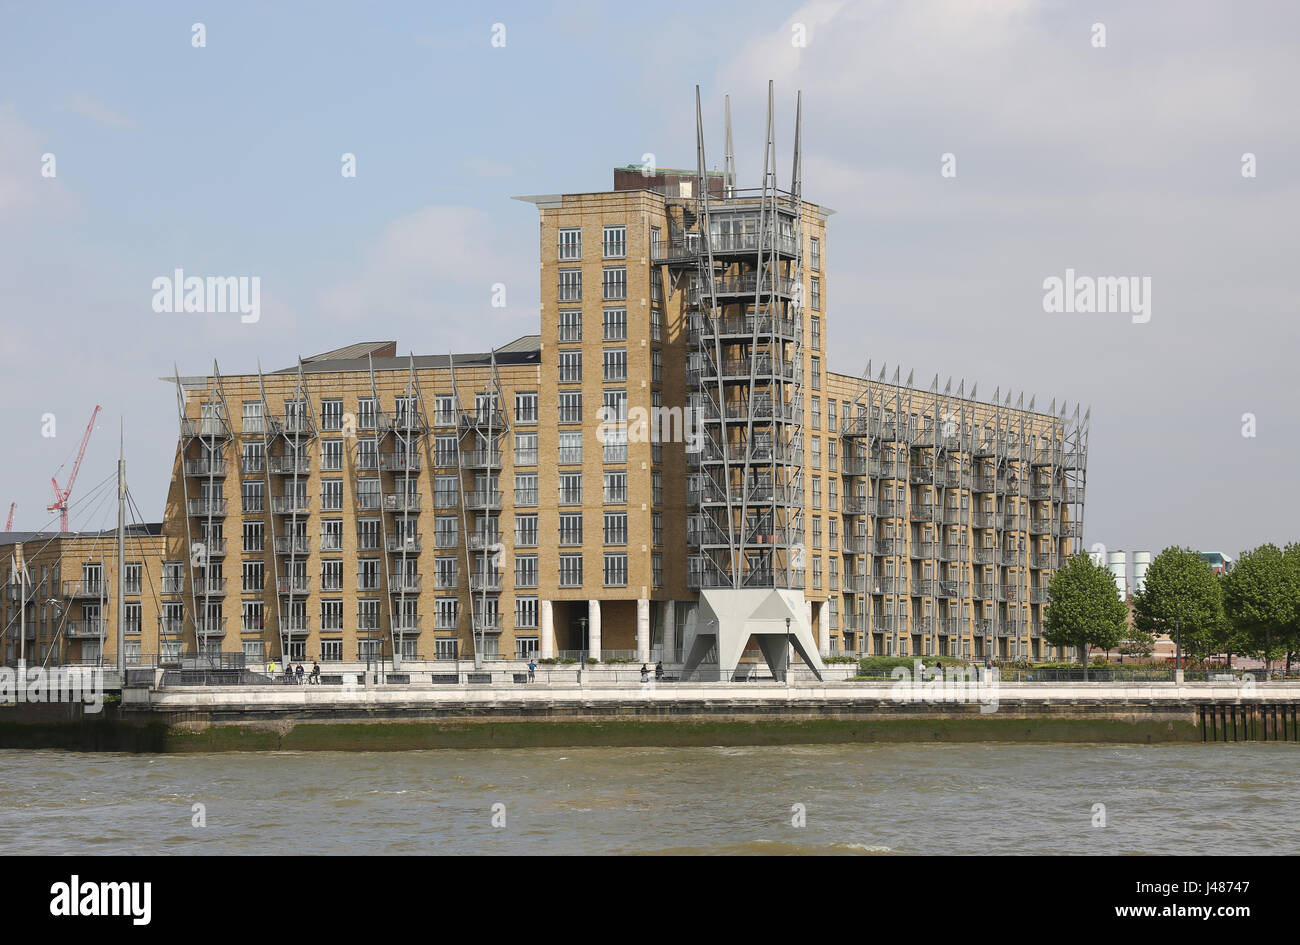 Dundee Wharf, a residential development on the River Thames in Wapping, London, UK. Built I 1997, designed by Architect Piers Gough. Stock Photo